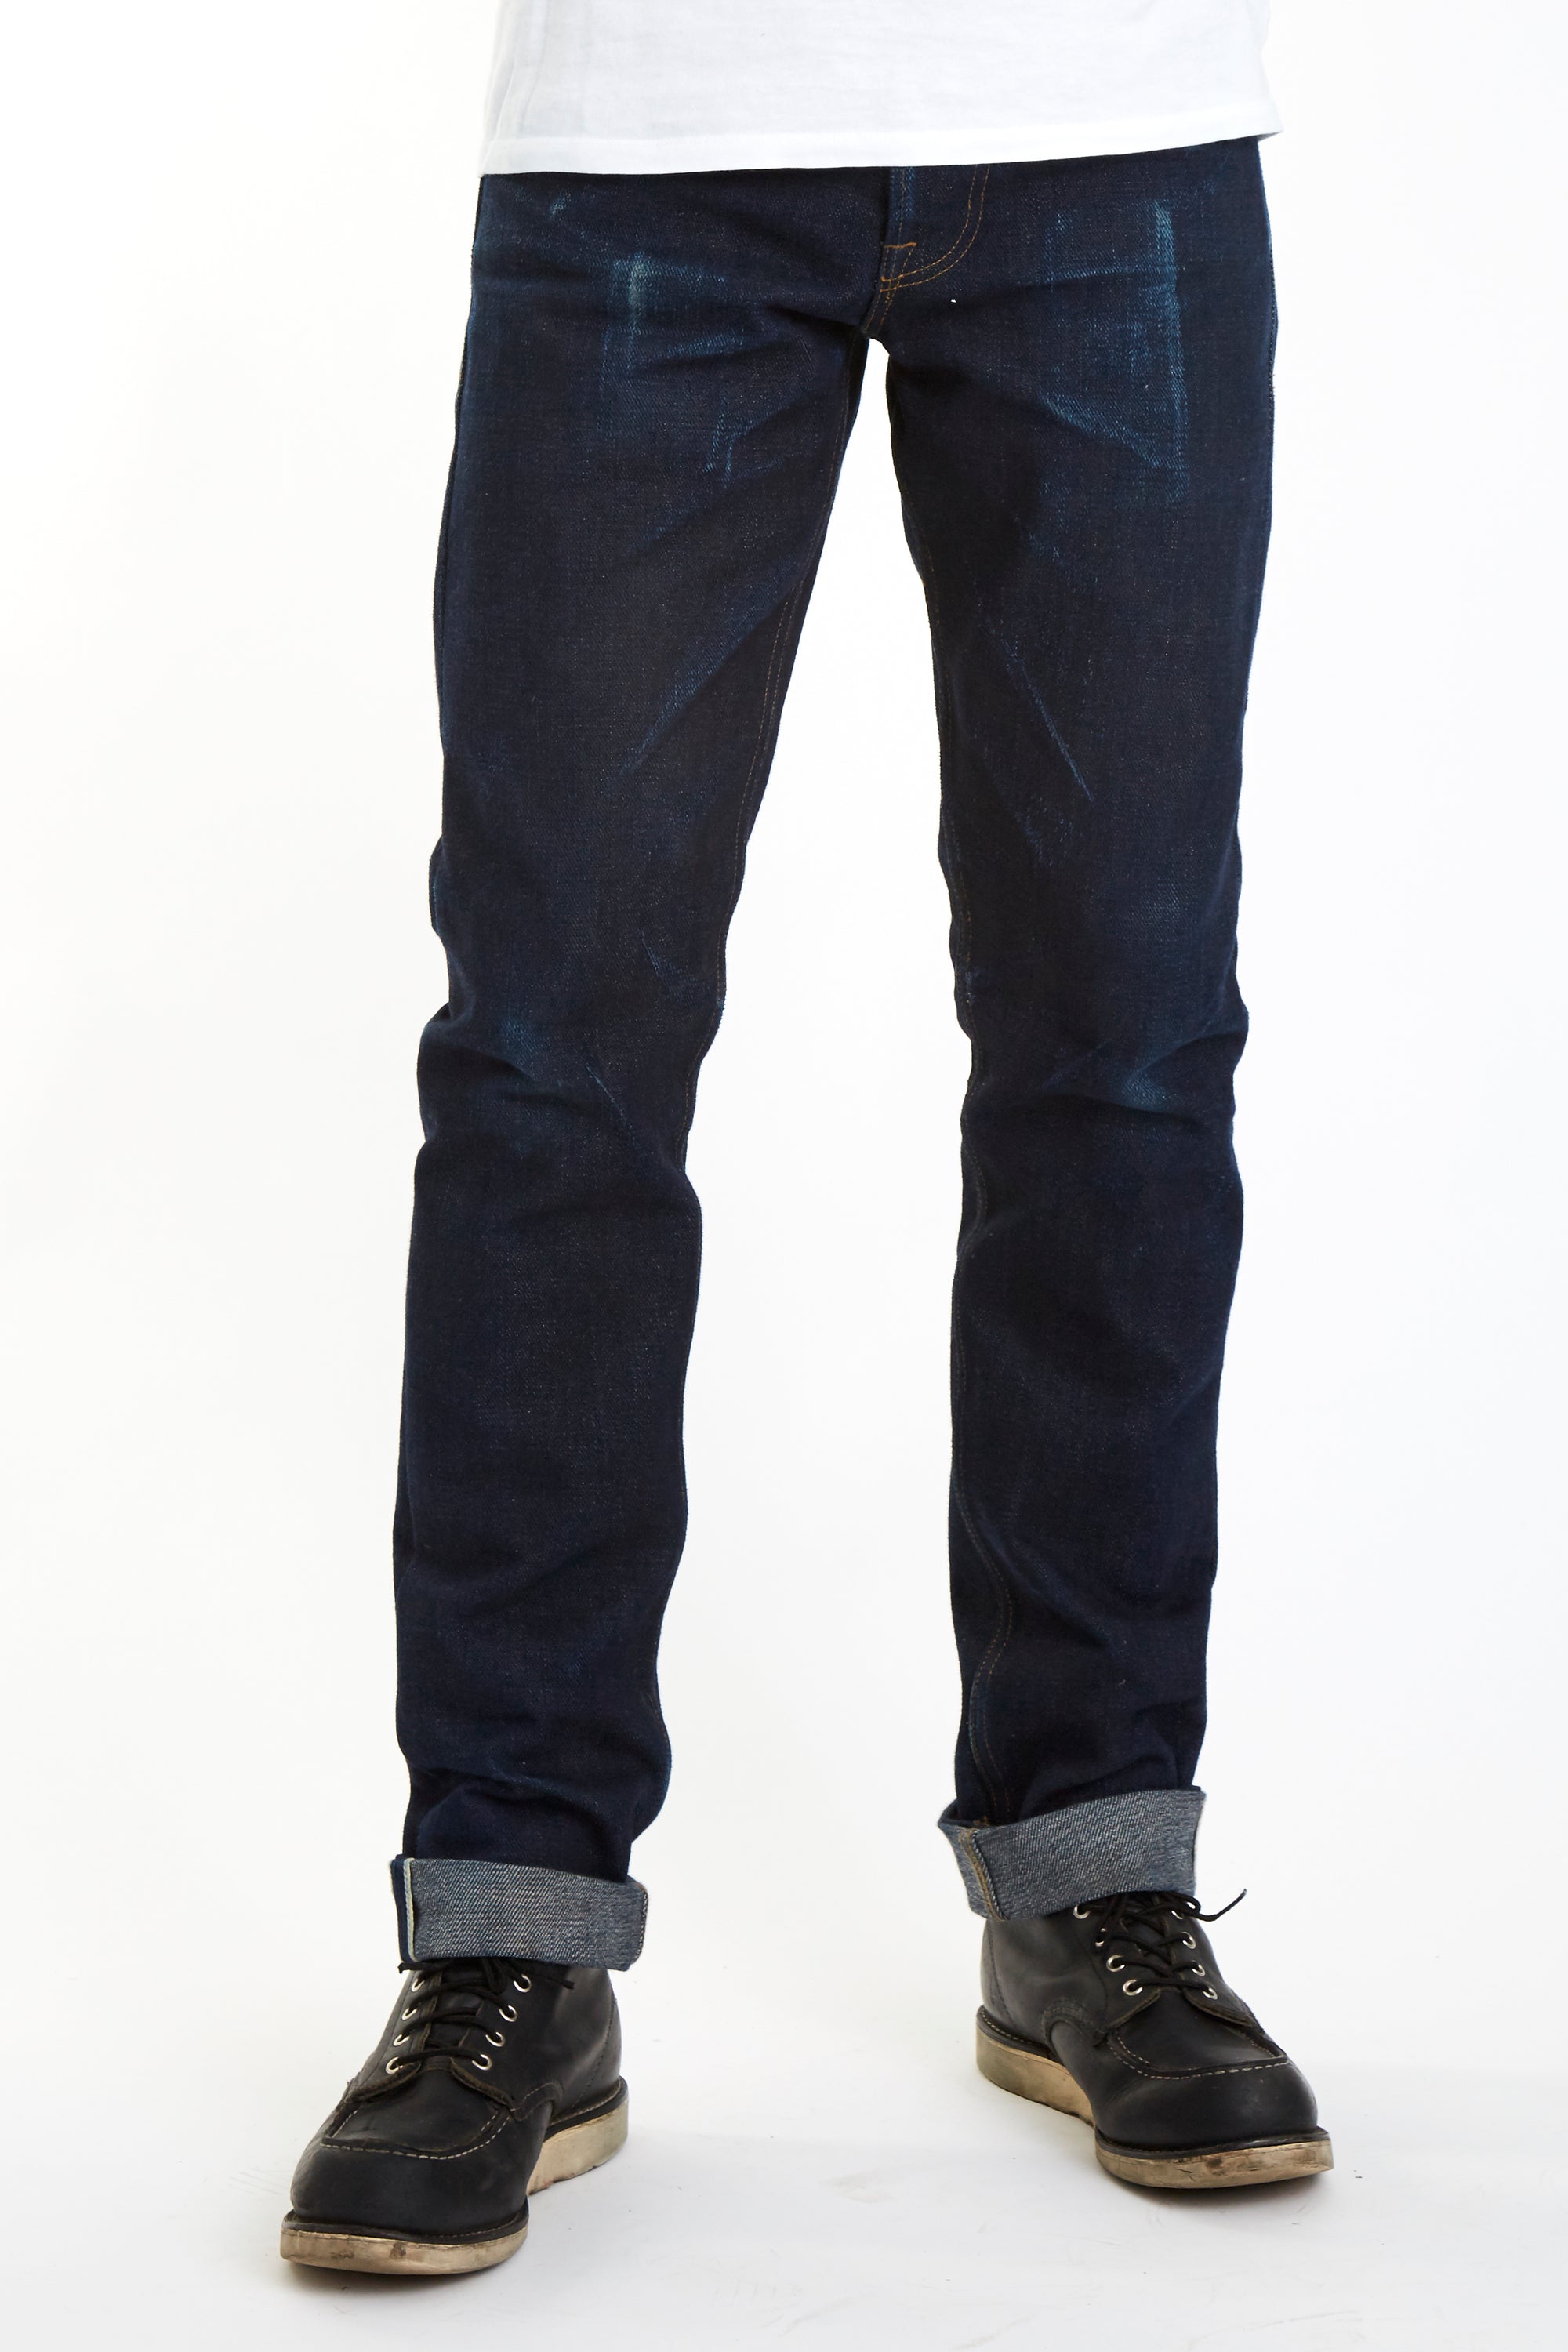 A More Focused Update of the 21.5 oz BRAVESTAR Selvedge 